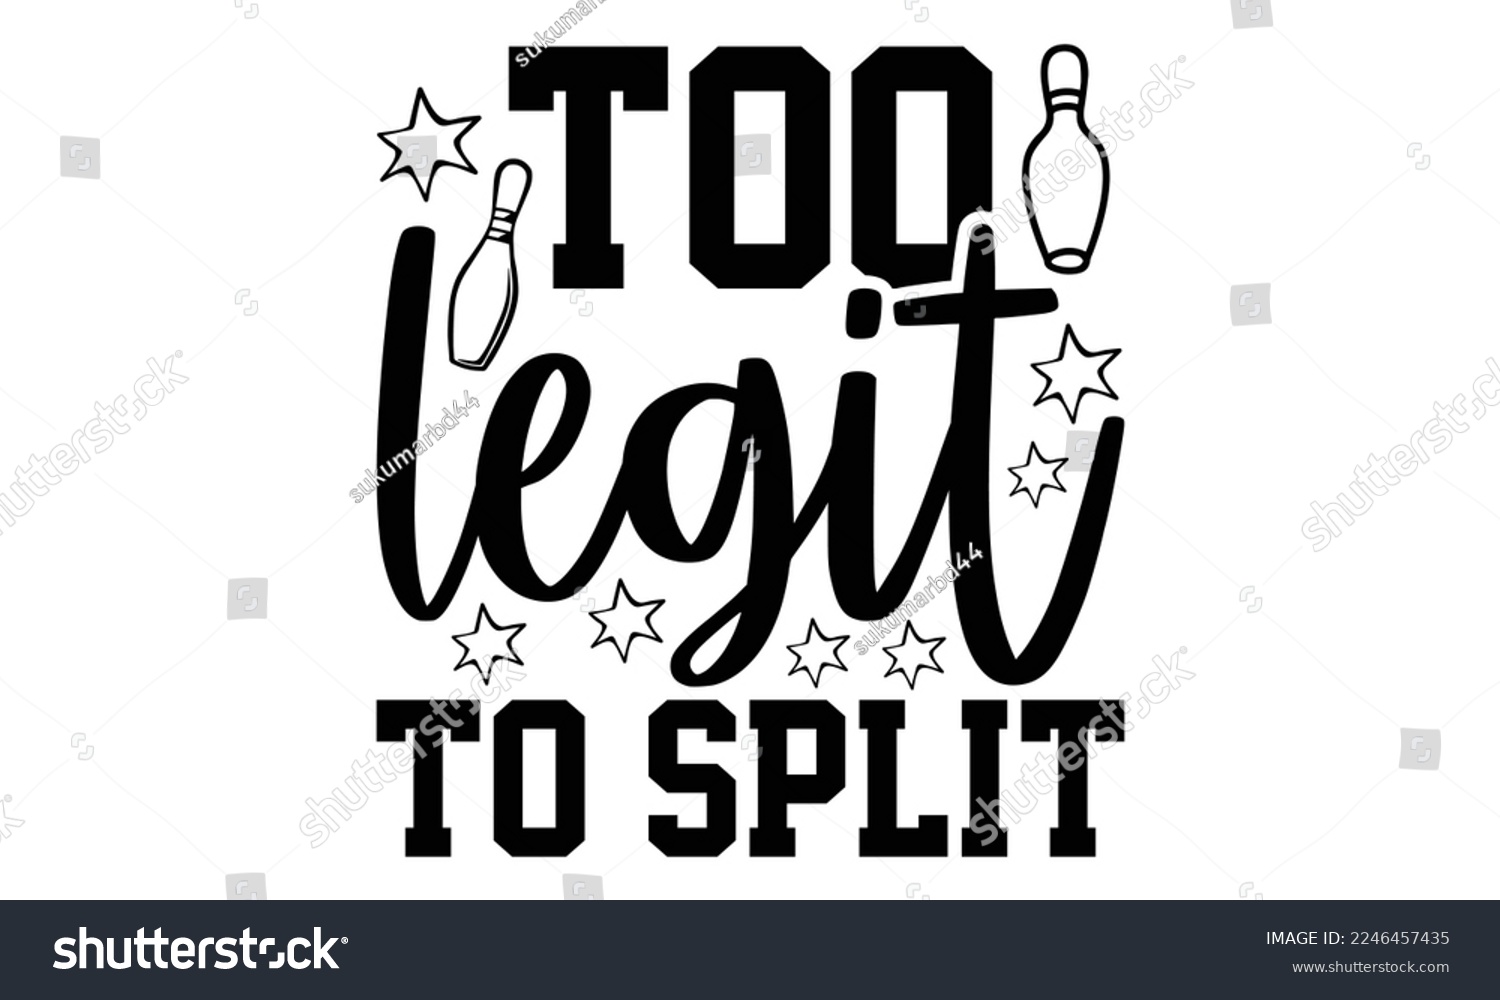 SVG of Too Legit To Split - Bowling T-shirt Design, eps, svg Files for Cutting, Calligraphy graphic design, Hand drawn lettering phrase isolated on white background svg